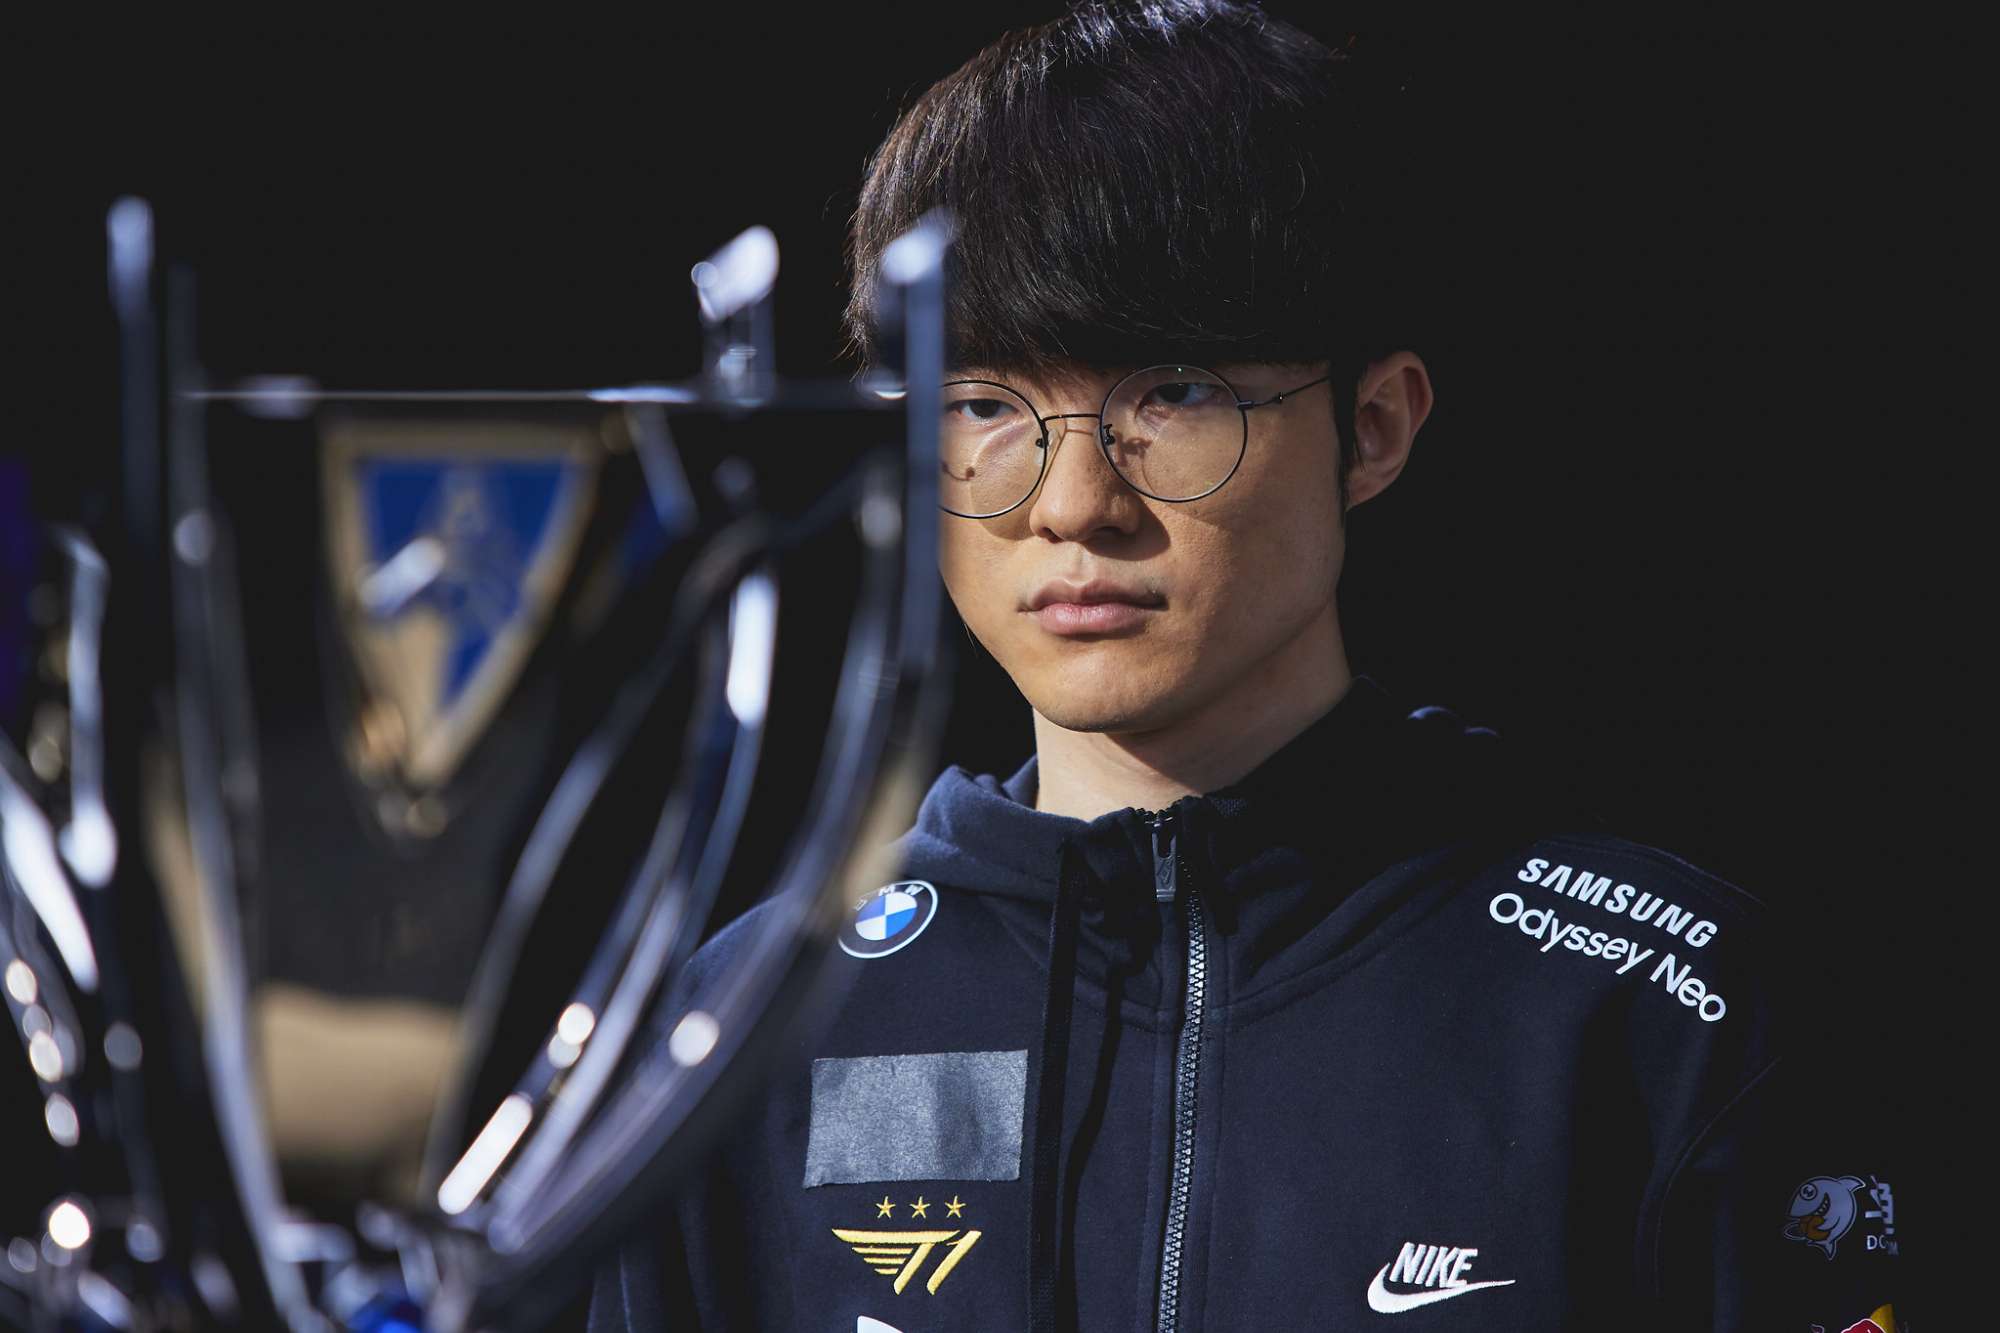 T1 CEO has a suspicious move, fans are worried that Faker will break up with T1